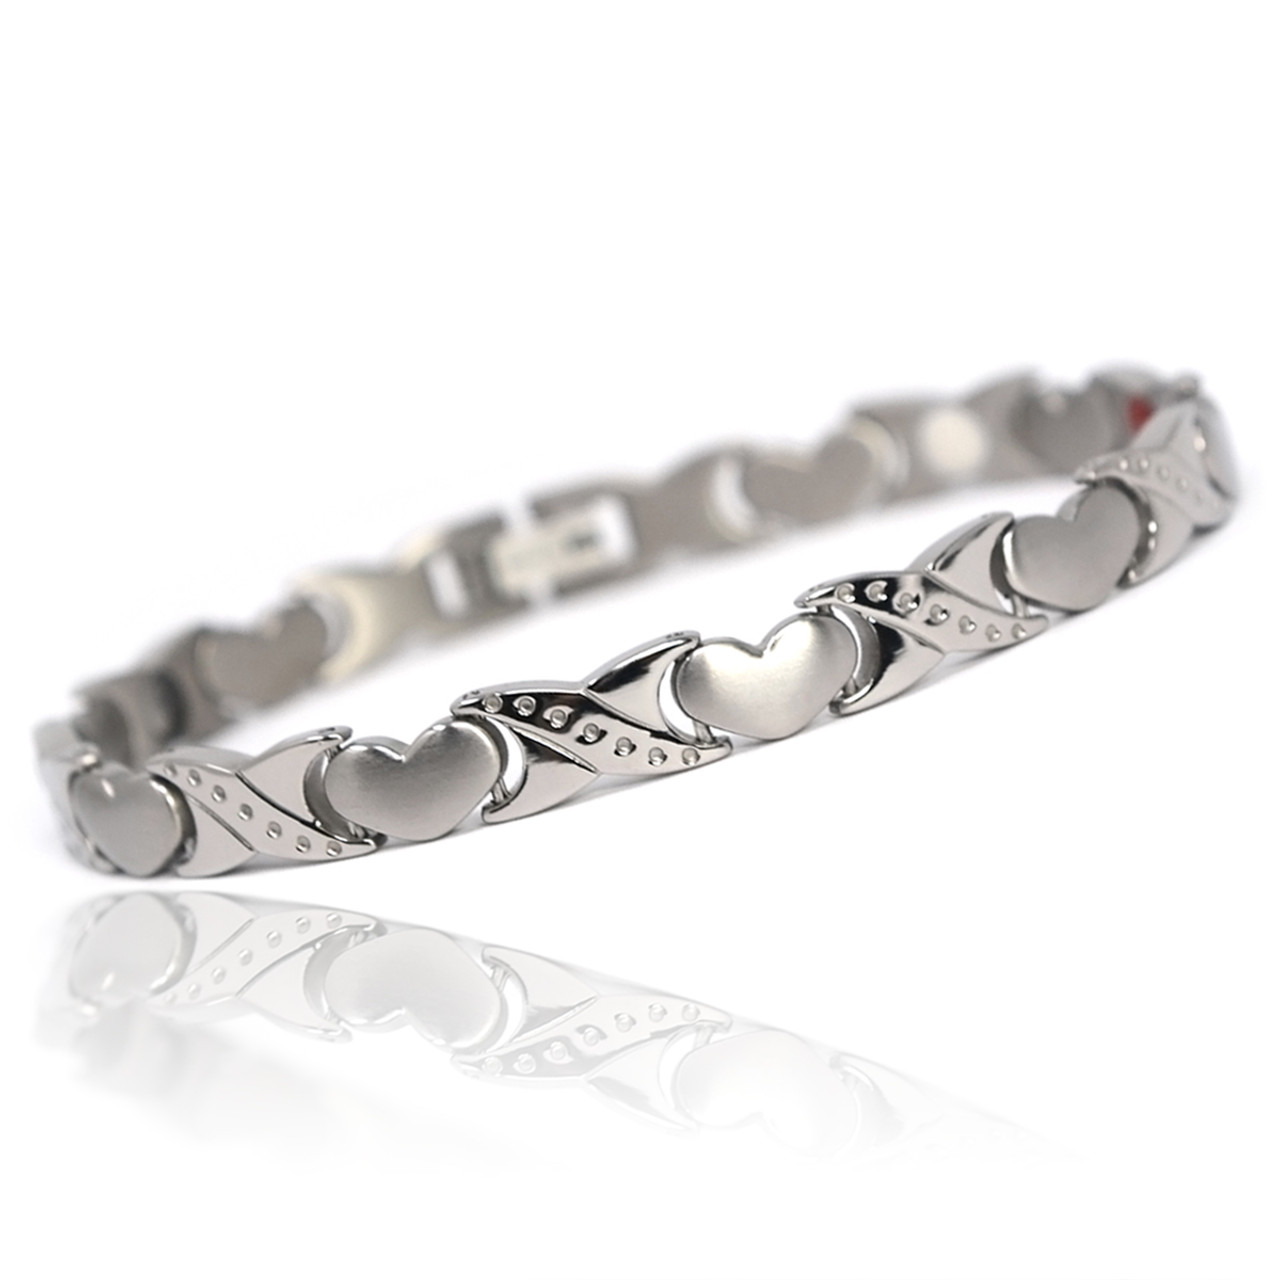 <img src=" womens silver stainless  magnet bracelet .png" alt="casual magnetic therapy jewelry   Front view         Magnetic bracelet jewelry Novoa Women 's - 12,800 Gauss B428">